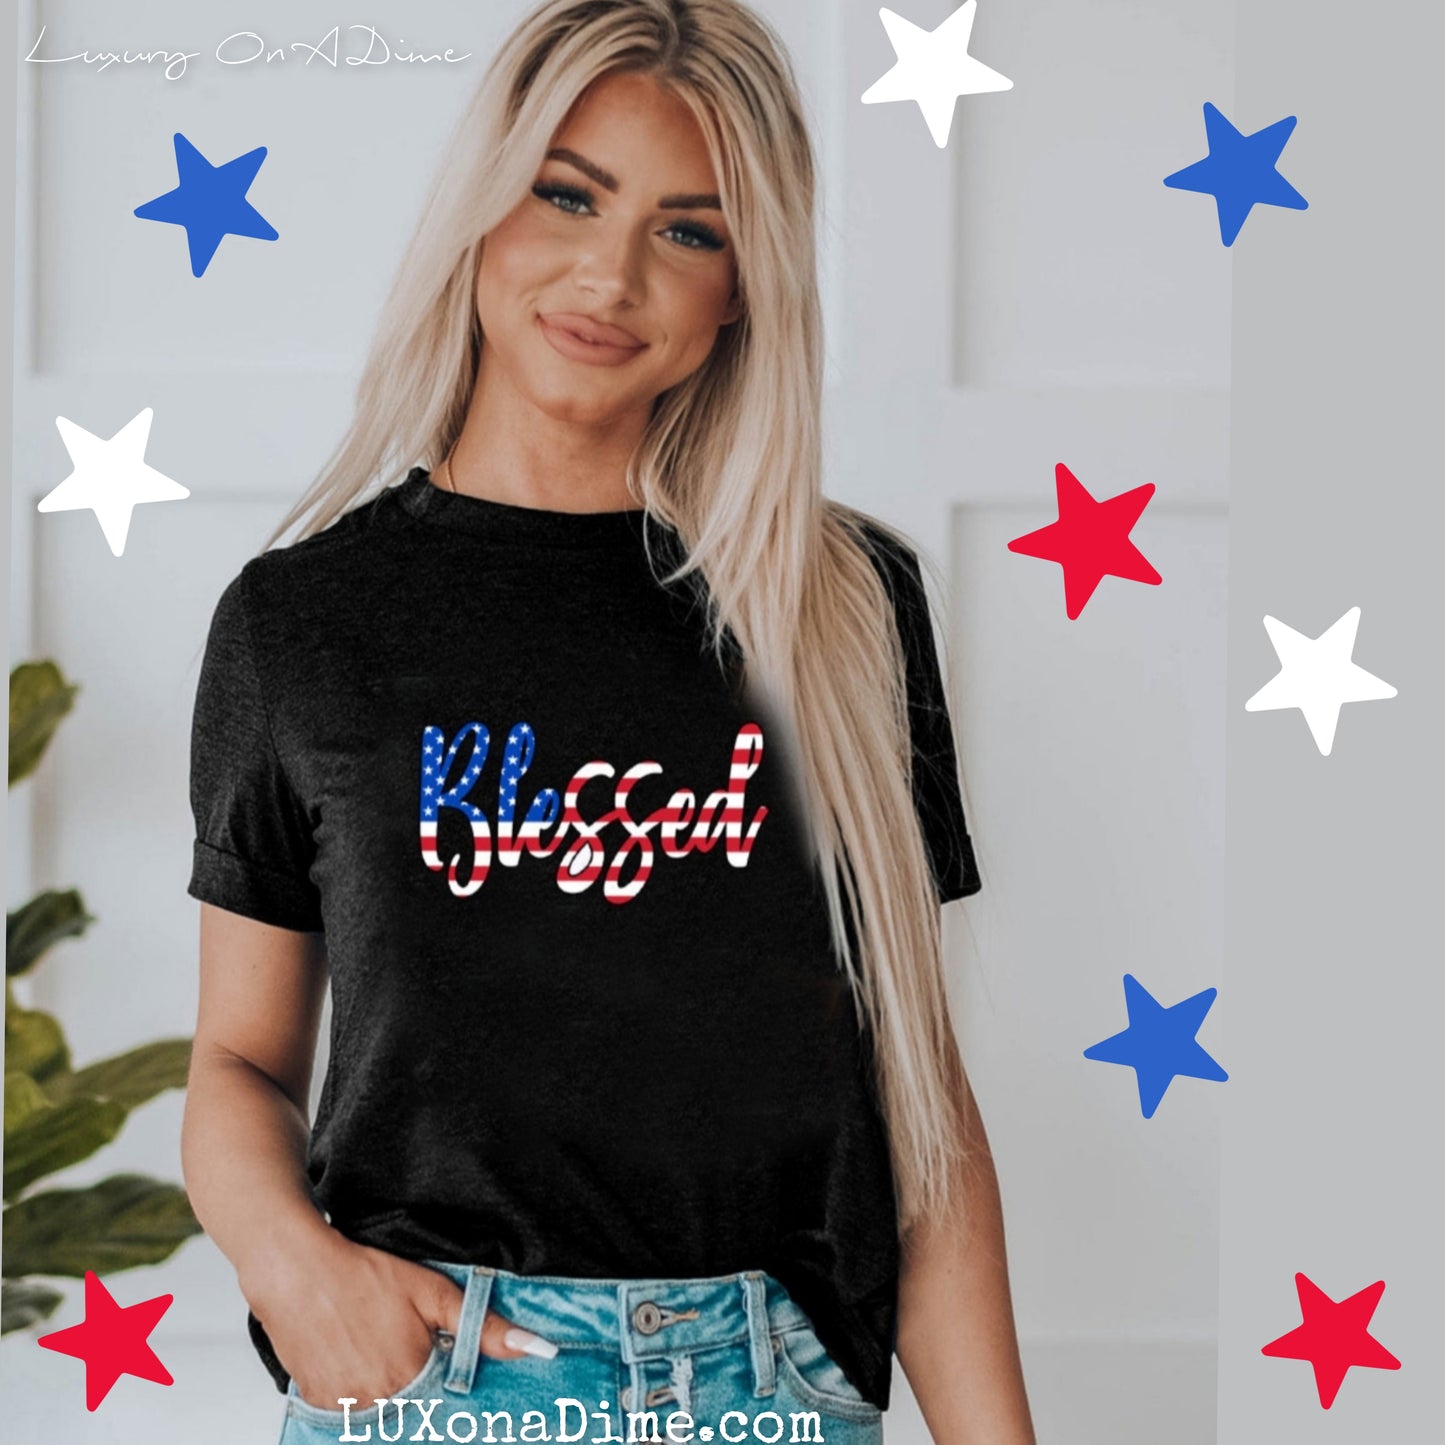 American BLESSED USA Flag Top Round Neck Shortsleeve Tee Shirt